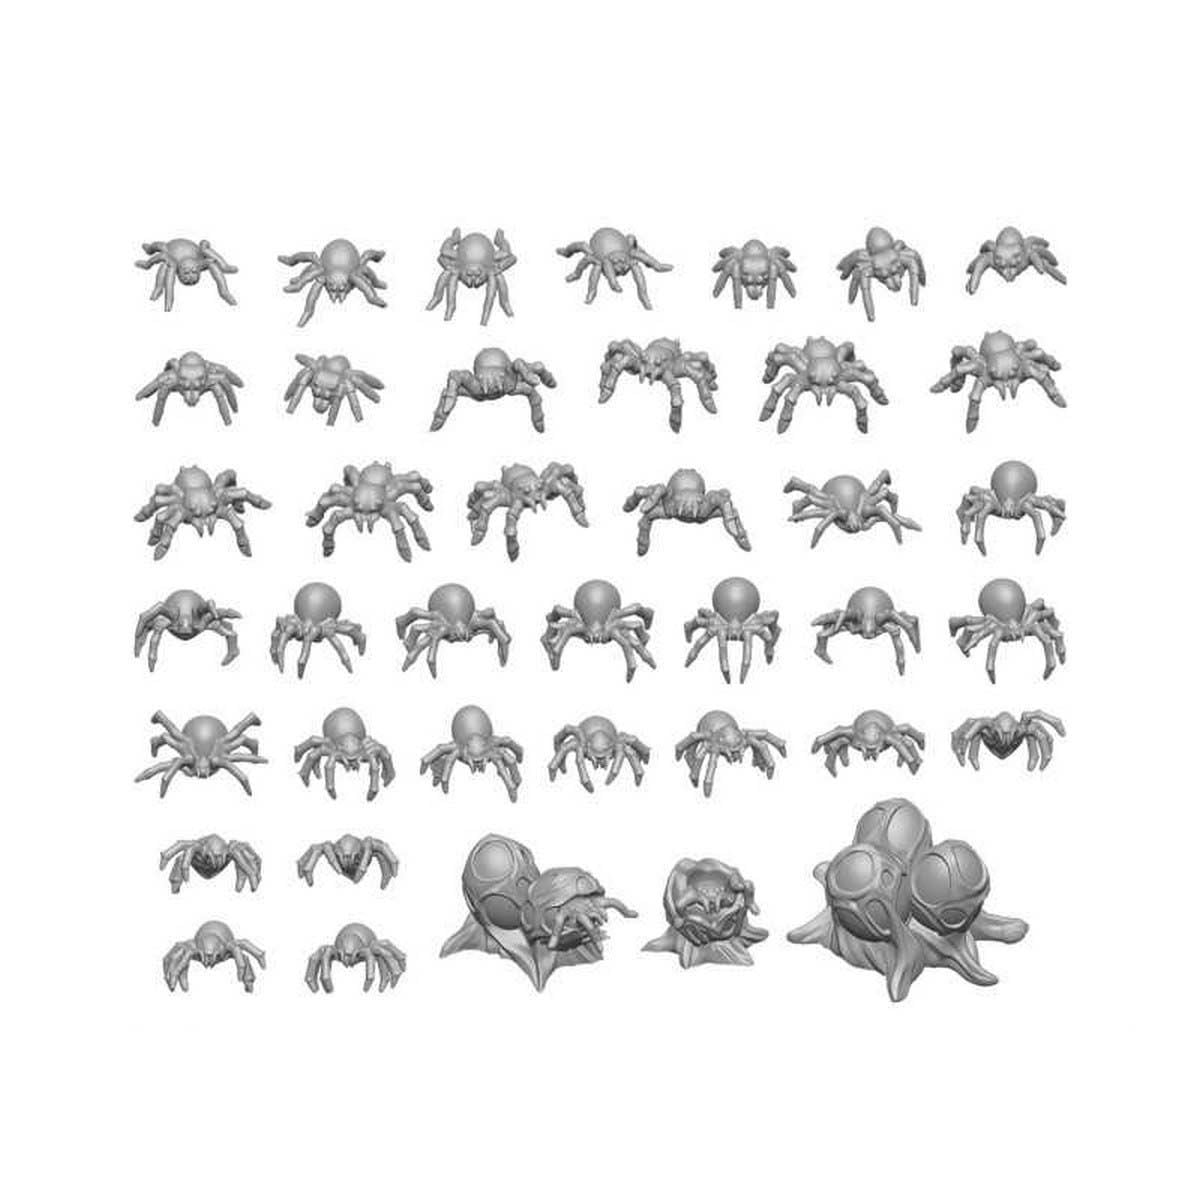 3D Printed Set - Small Spiders